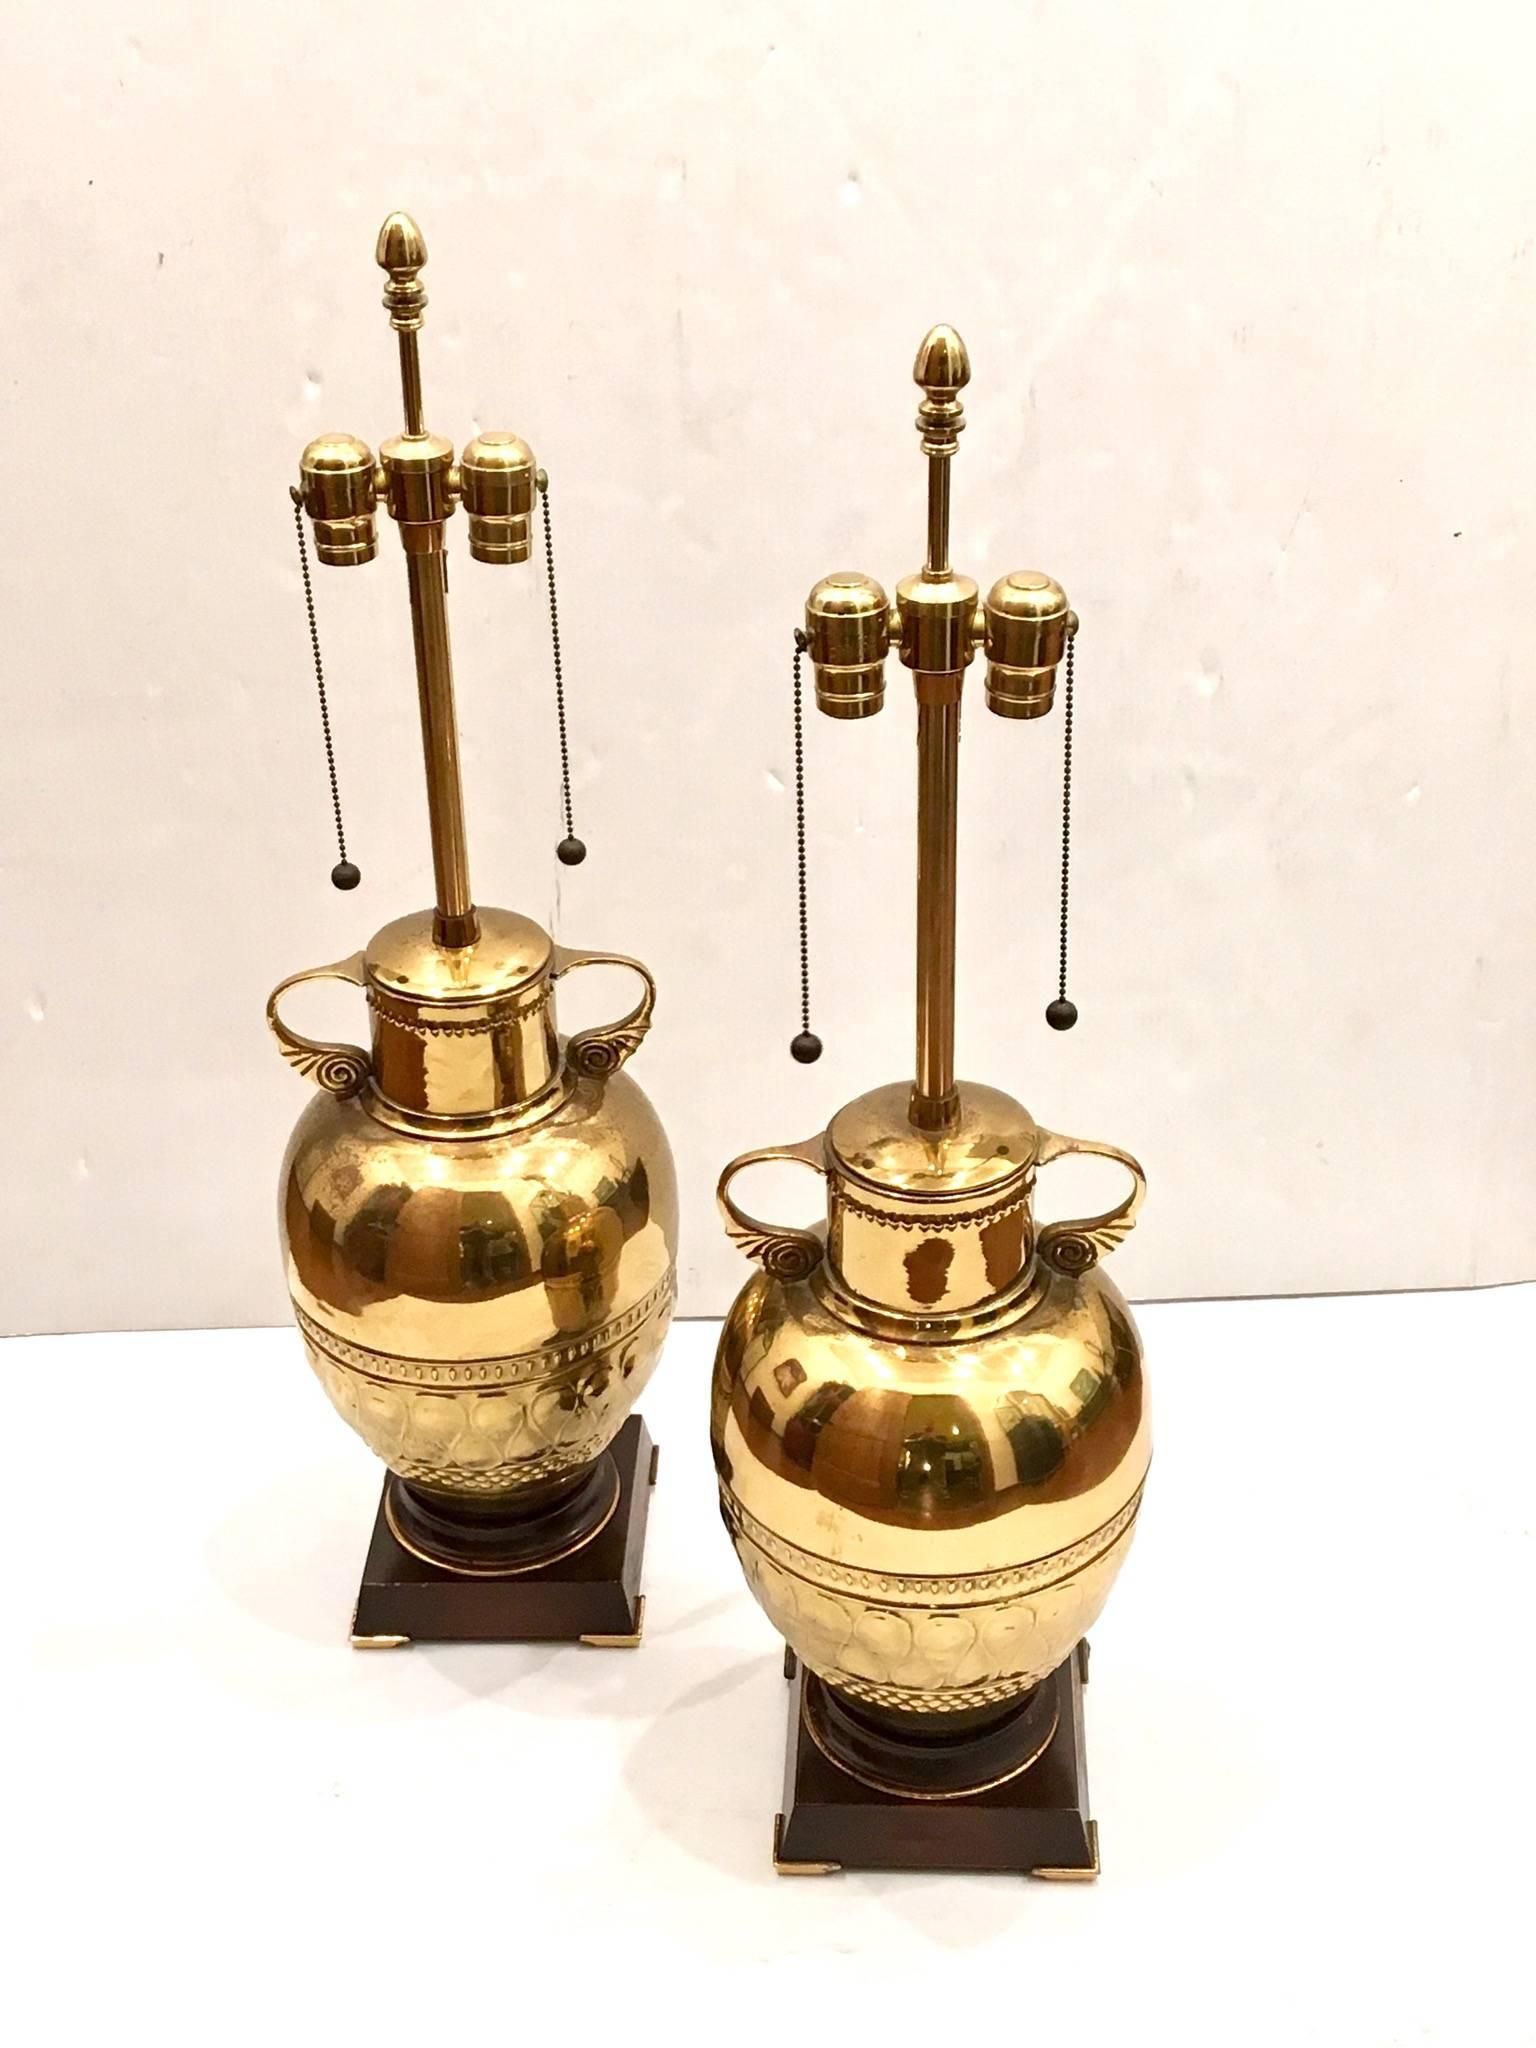 Beautiful and elegant pair of table lamps by Marbro Lamp Company, circa 1960s. All original condition lamp shades not included, double head sockets, patinated brass urns sitting on a mahogany finish lacquered base. Measures: 33 1/2